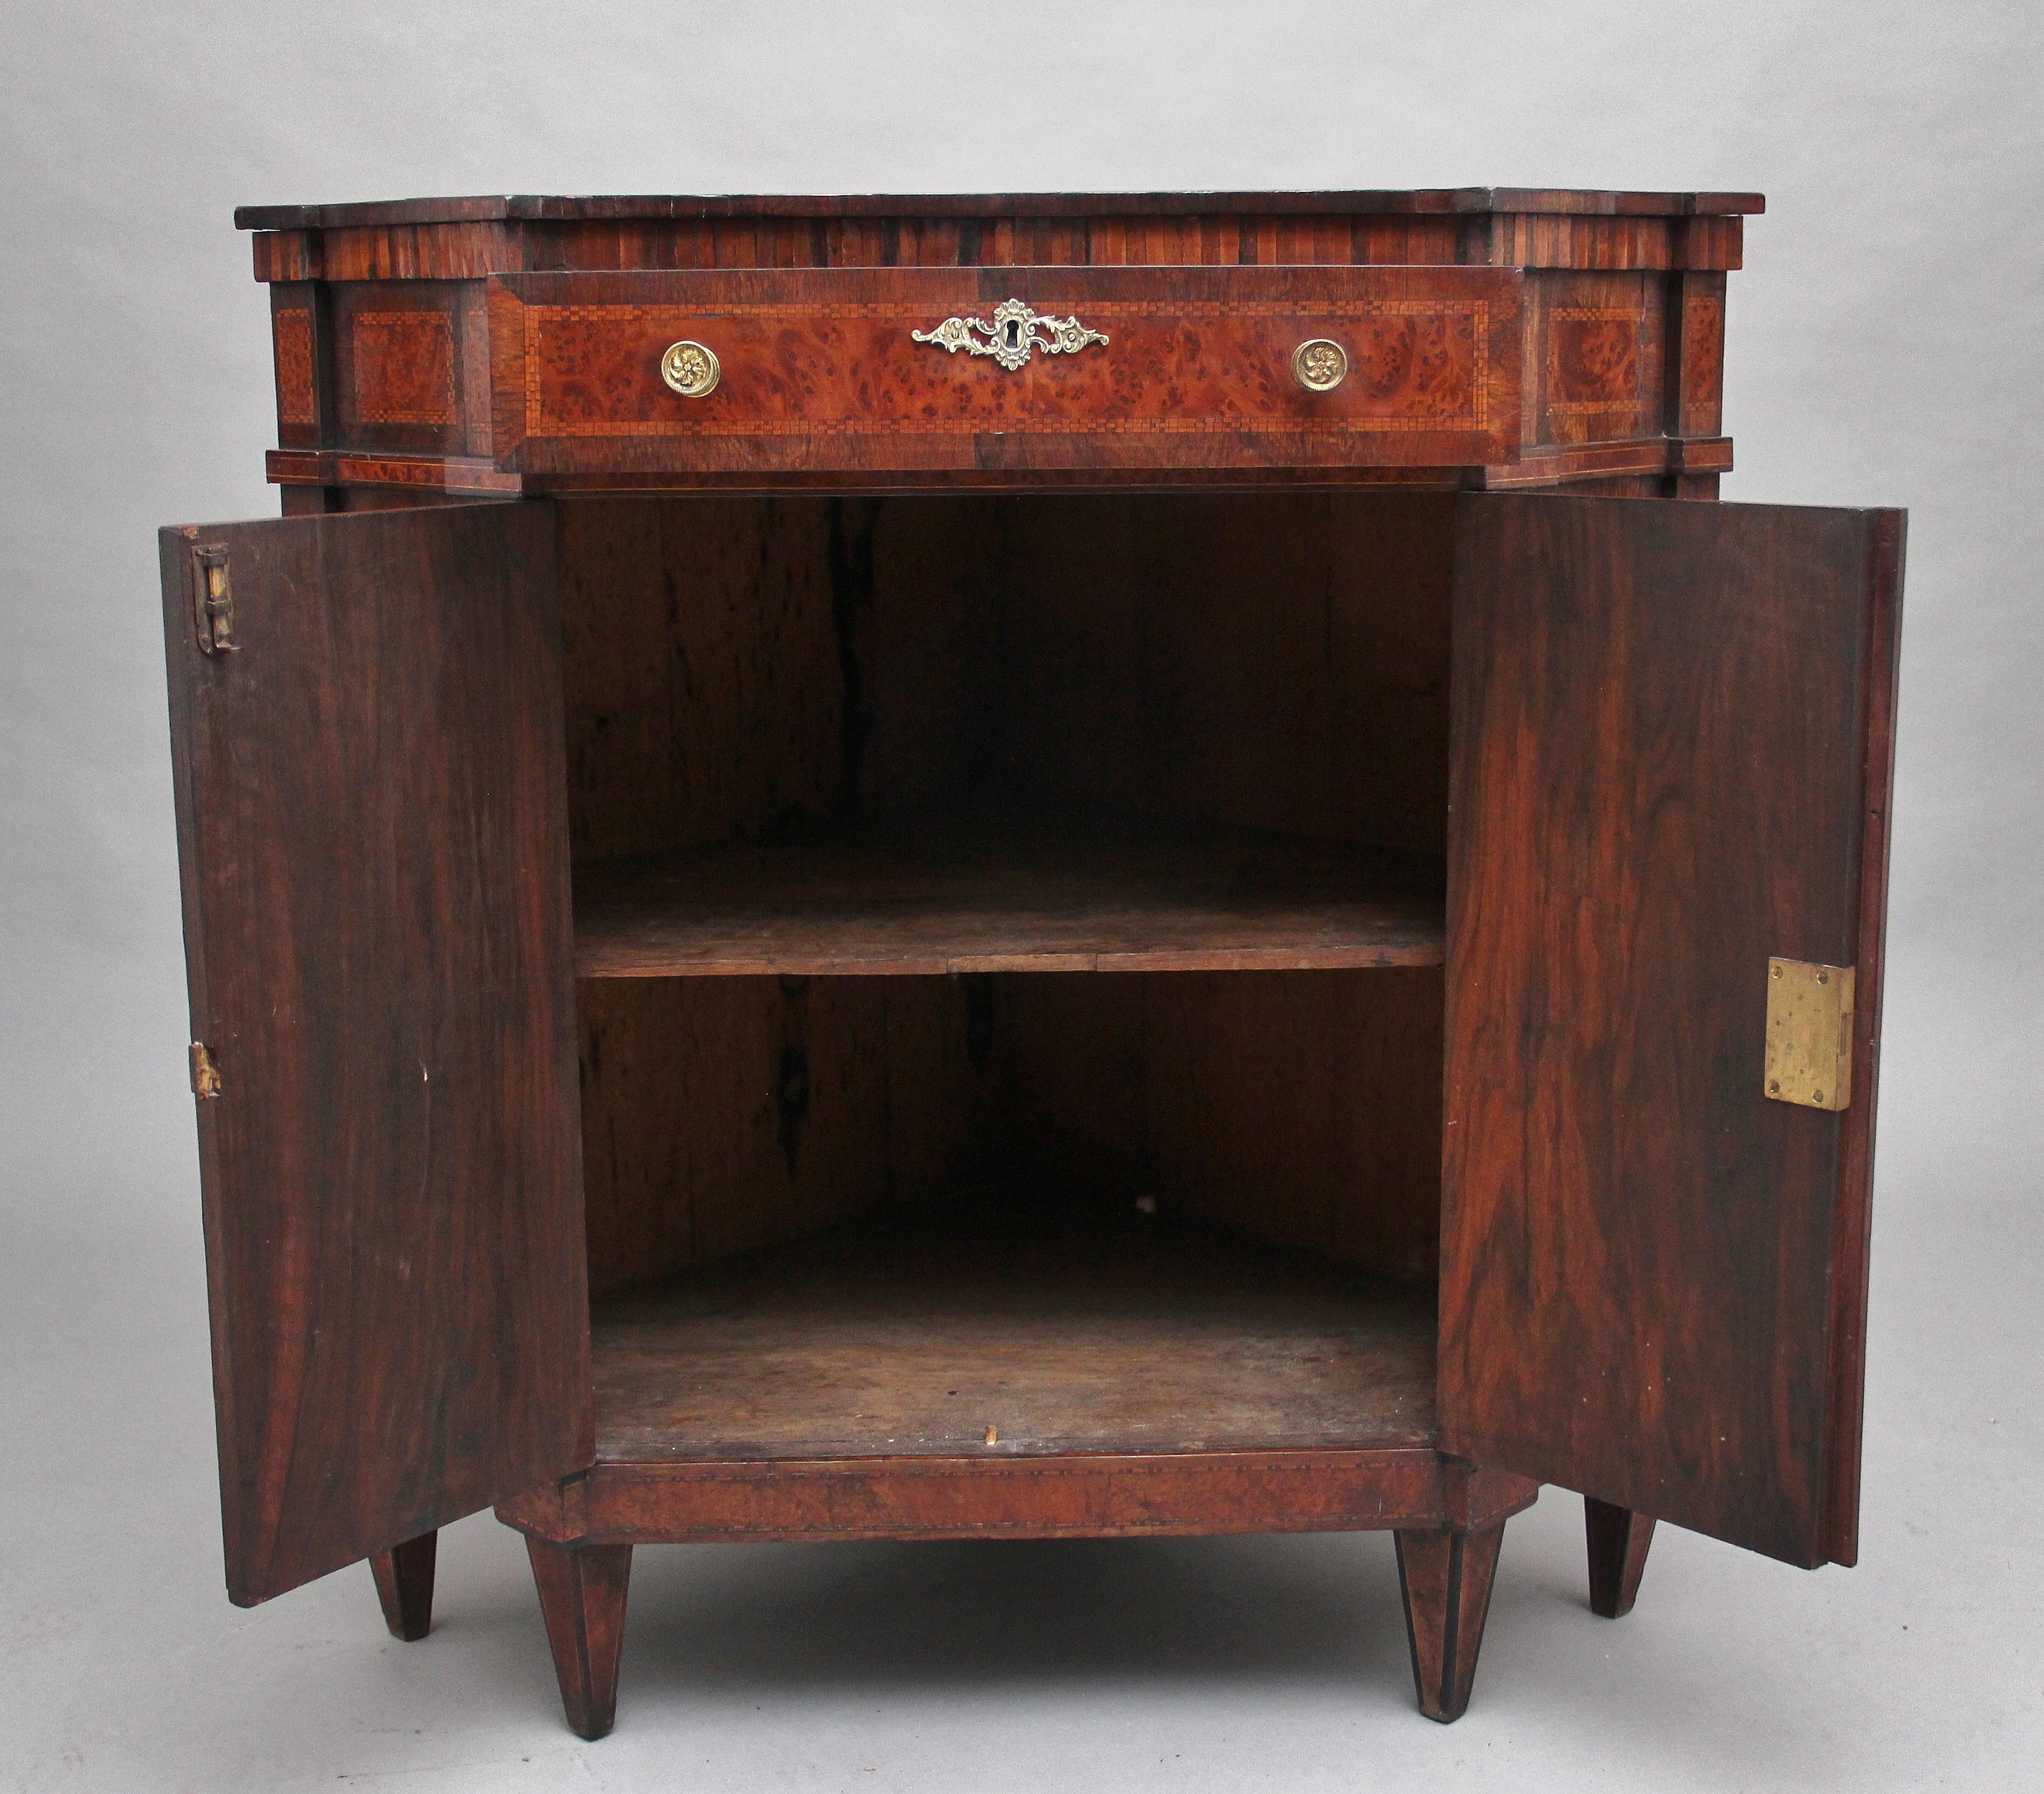 Early Victorian 19th Century Burr Yew Wood and Inlaid Corner Cabinet